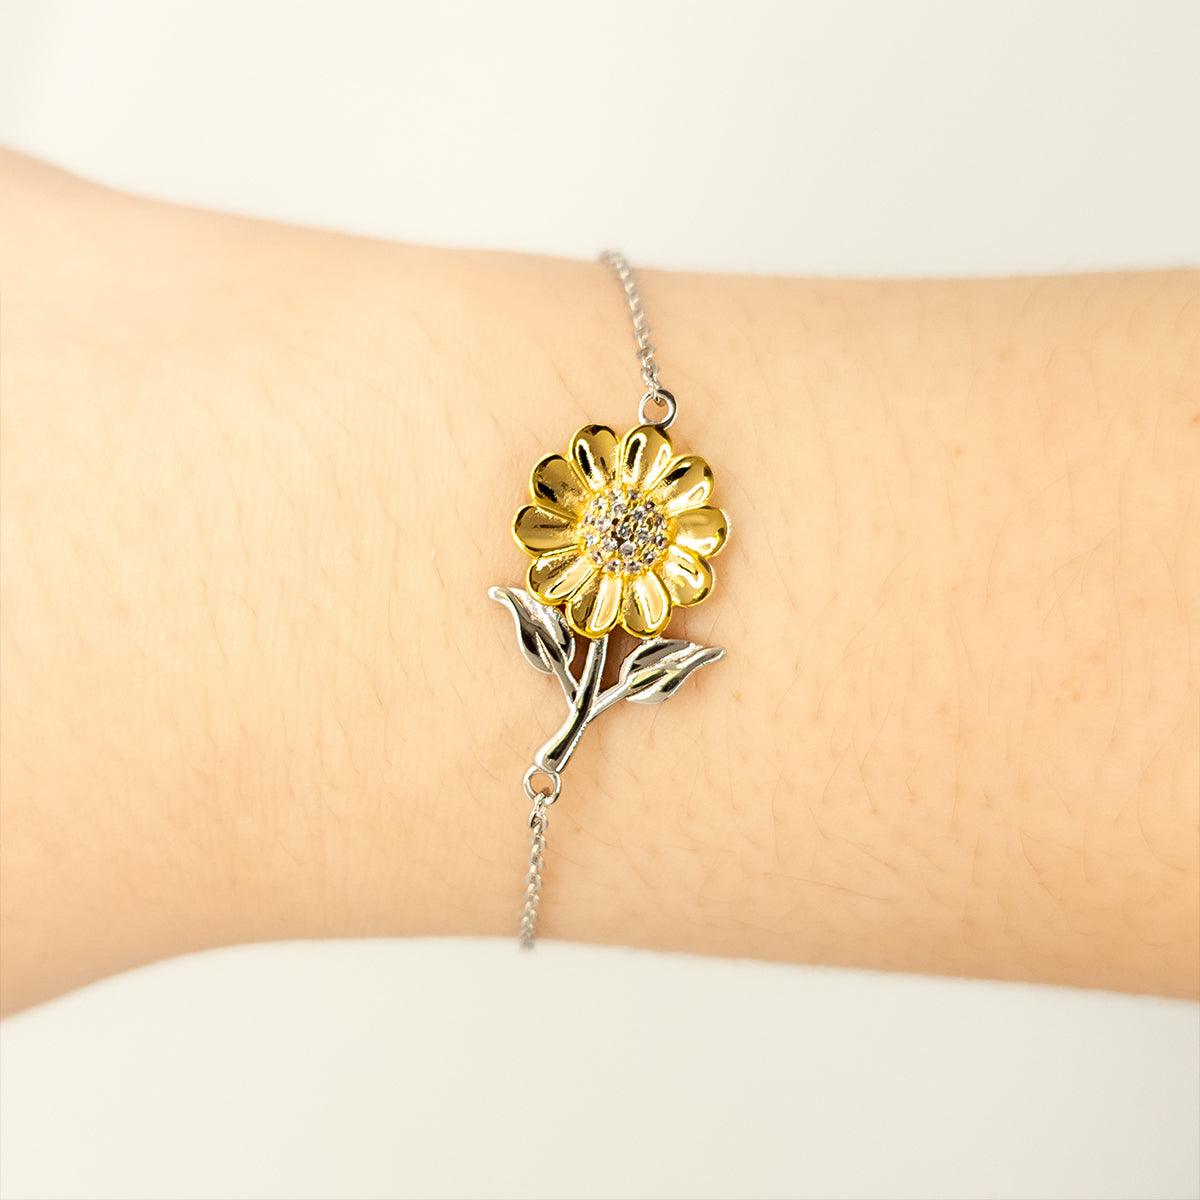 Mortician Sunflower Bracelet - Thanks for being who you are - Birthday Christmas Jewelry Gifts Coworkers Colleague Boss - Mallard Moon Gift Shop